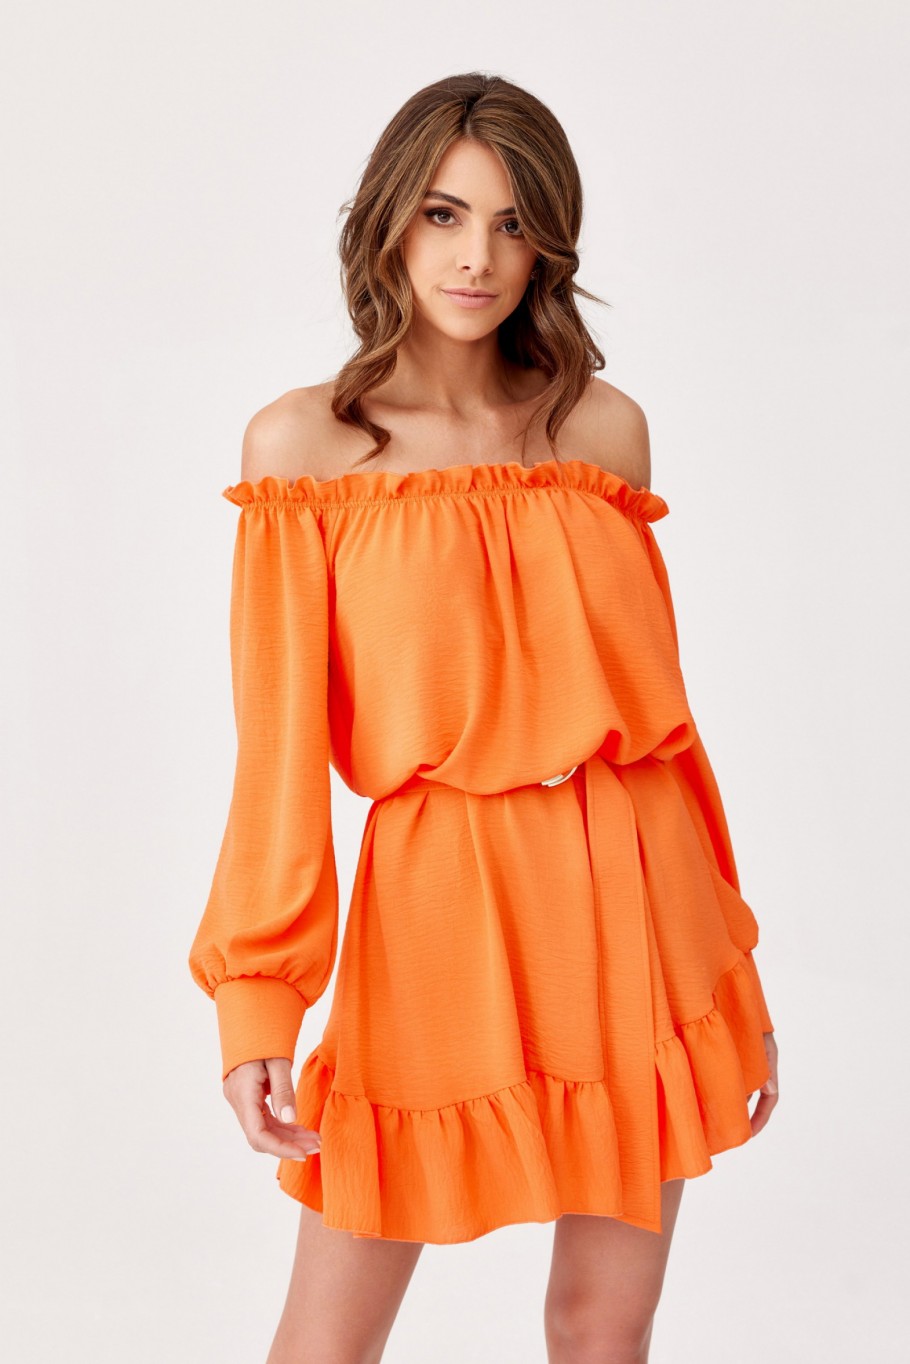 Cindy - off-the-shoulder dress with ruffles and adjustable belt POM